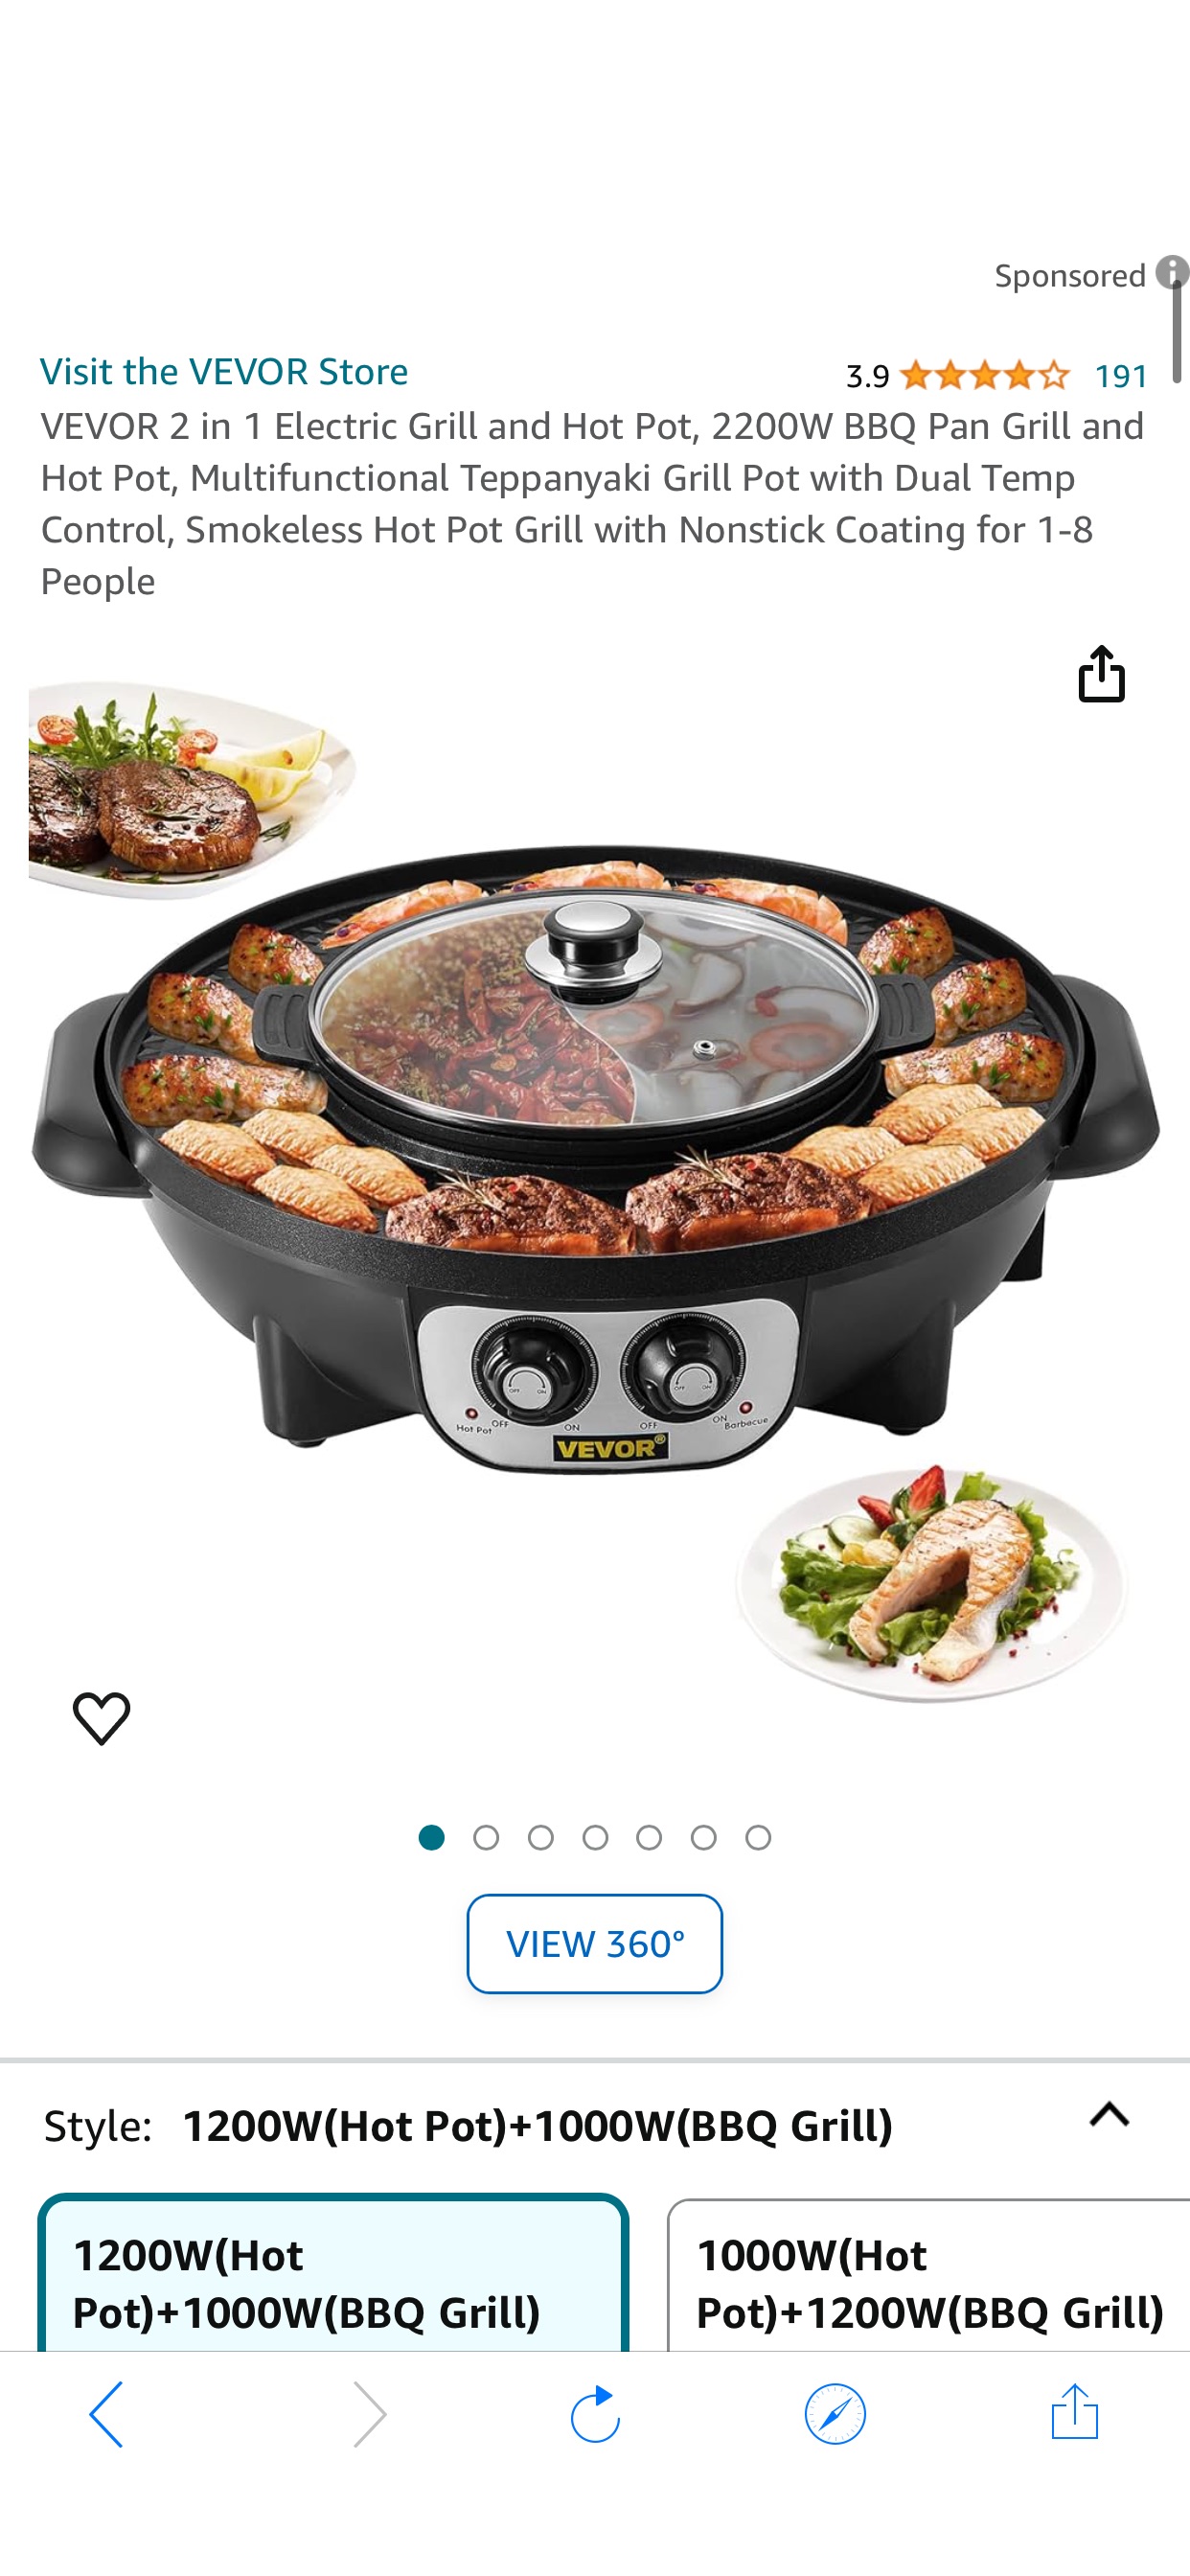 Amazon.com: VEVOR 2 in 1 Electric Grill and Hot Pot, 2200W BBQ Pan Grill and Hot Pot, Multifunctional Teppanyaki Grill Pot with Dual Temp Control, Smokeless Hot Pot Grill with Nonstick Coating for 1-8